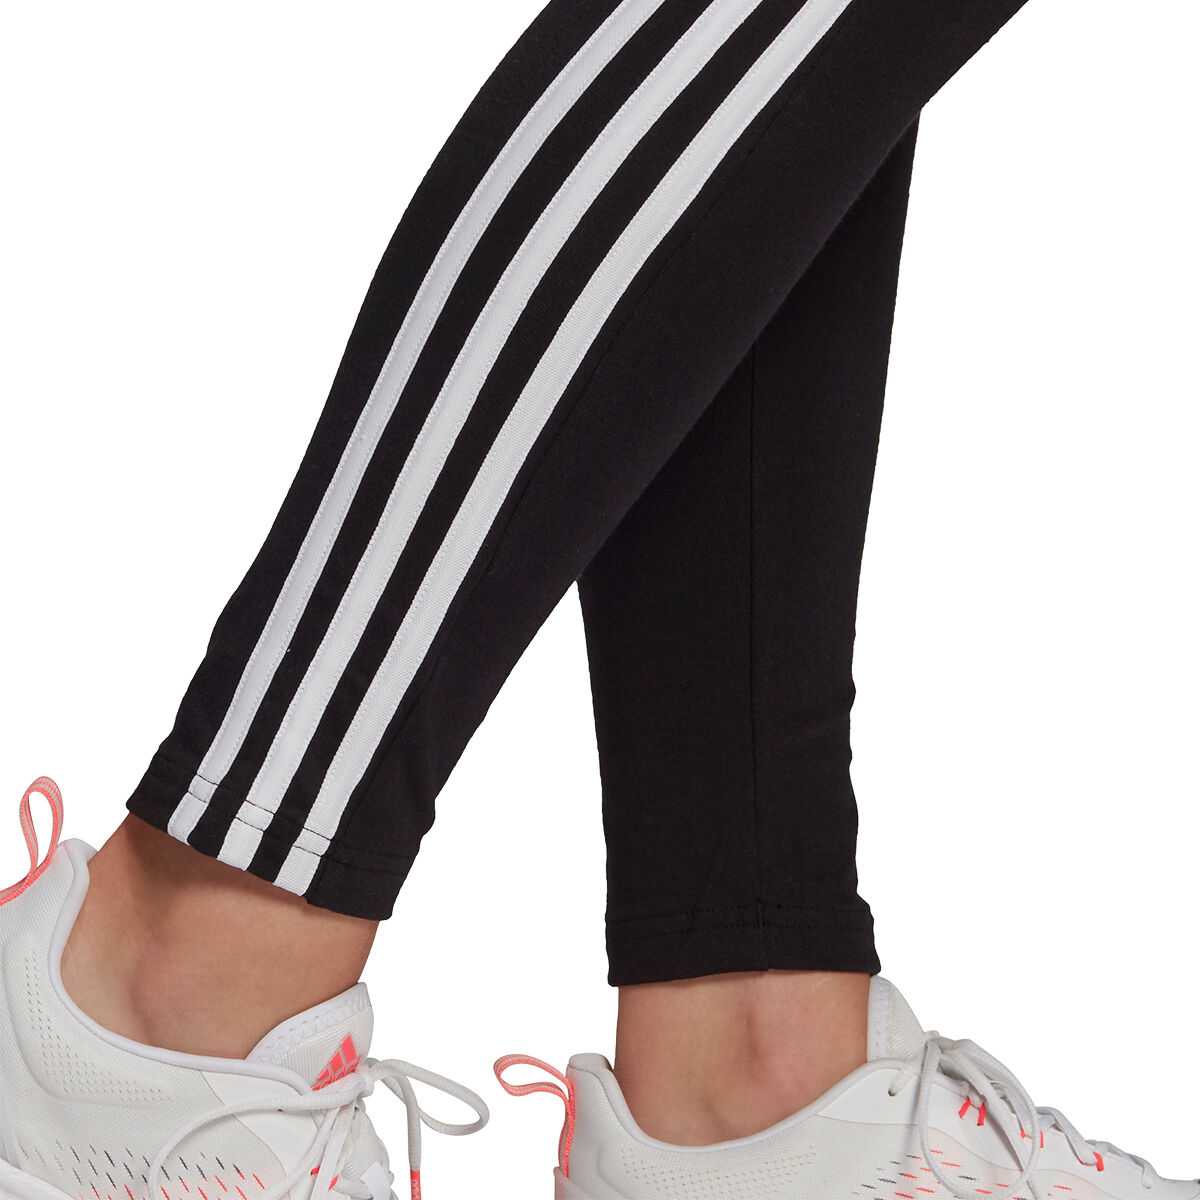 Adidas NWT Women's 3 Striped Training Leggings Size M - $32 - From